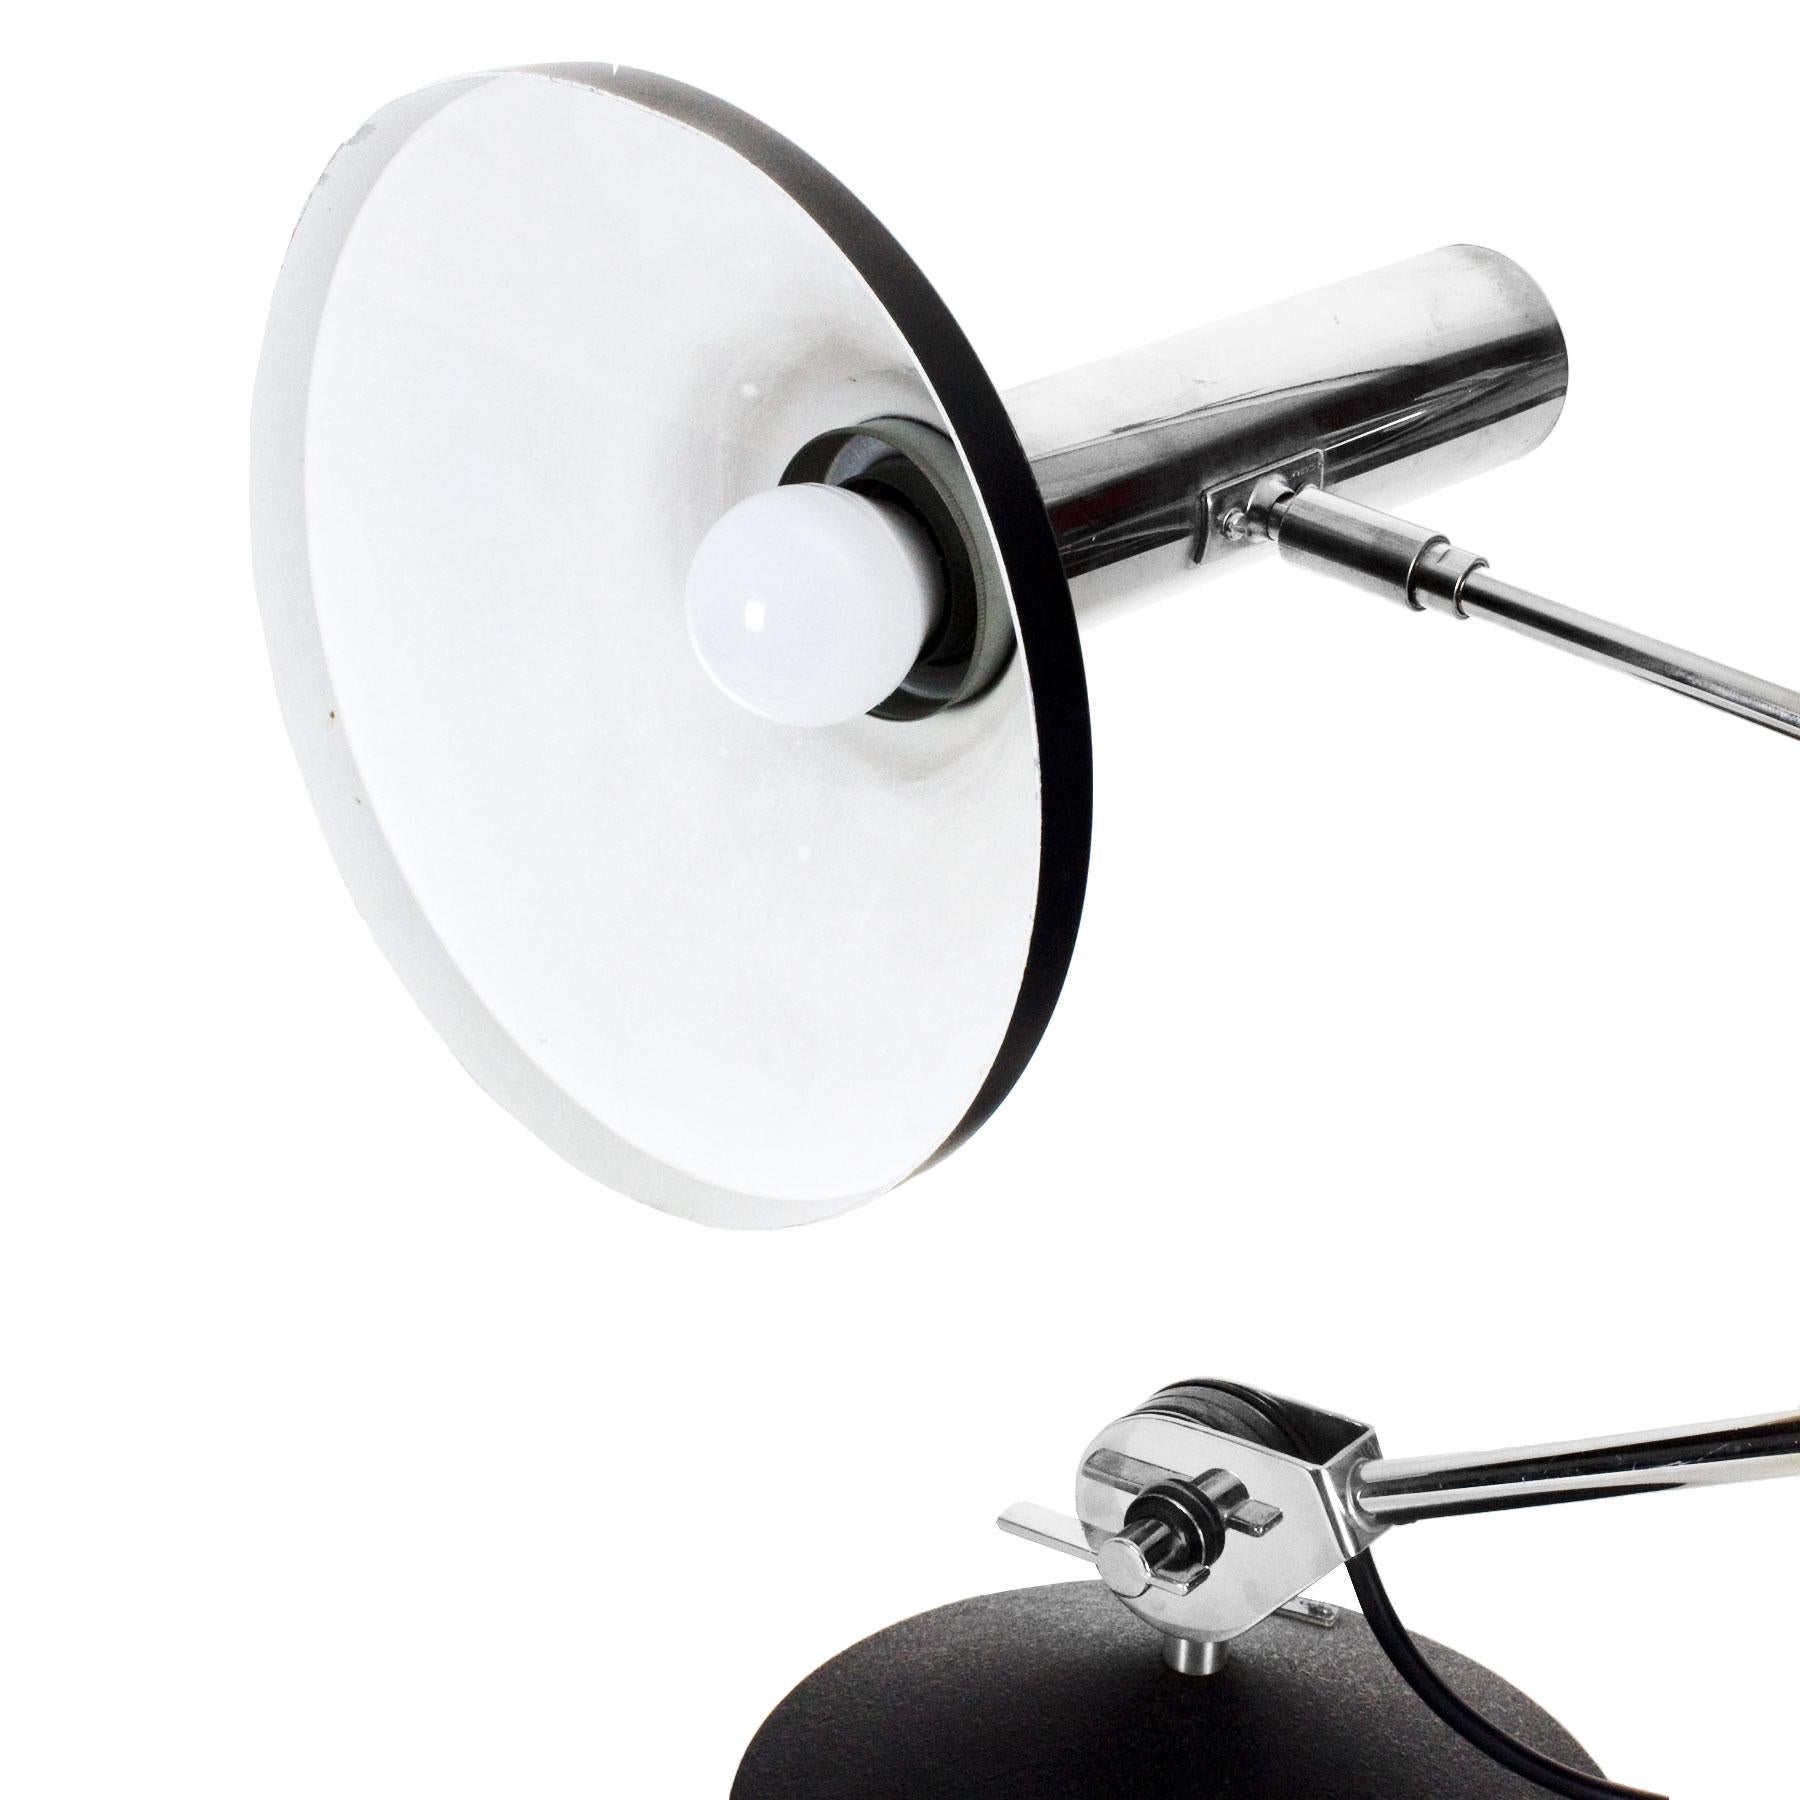  Large Articulated  Mid-Century Modern Chrome-Plated Desk Lamp - Belgium, 1960s In Good Condition For Sale In Girona, ES